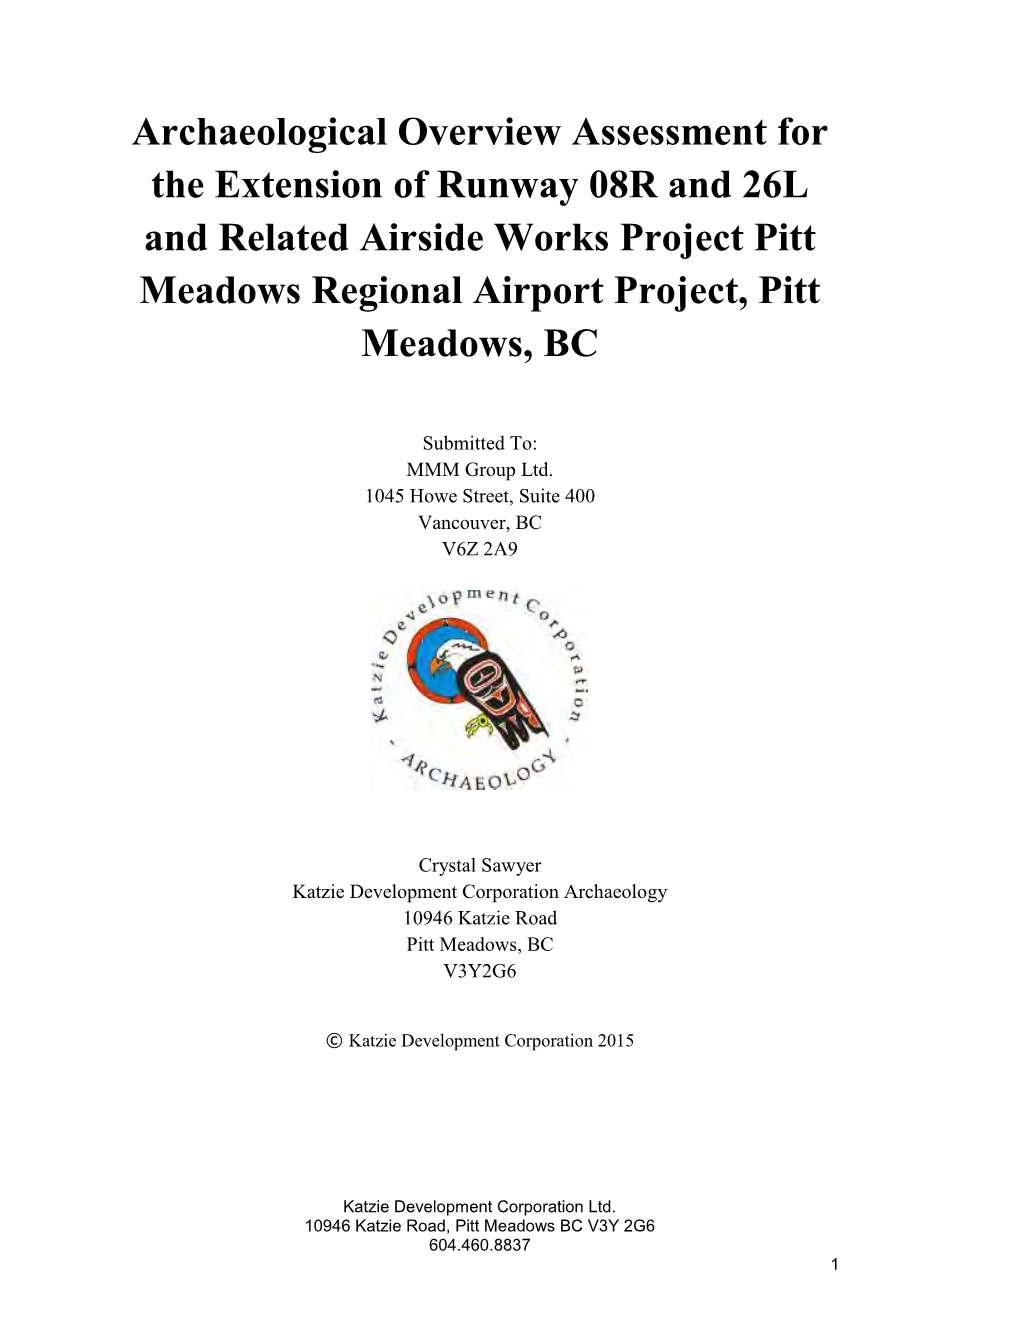 Archaeological Overview Assessment for the Extension of Runway 08R and 26L and Related Airside Works Project Pitt Meadows Regional Airport Project, Pitt Meadows, BC